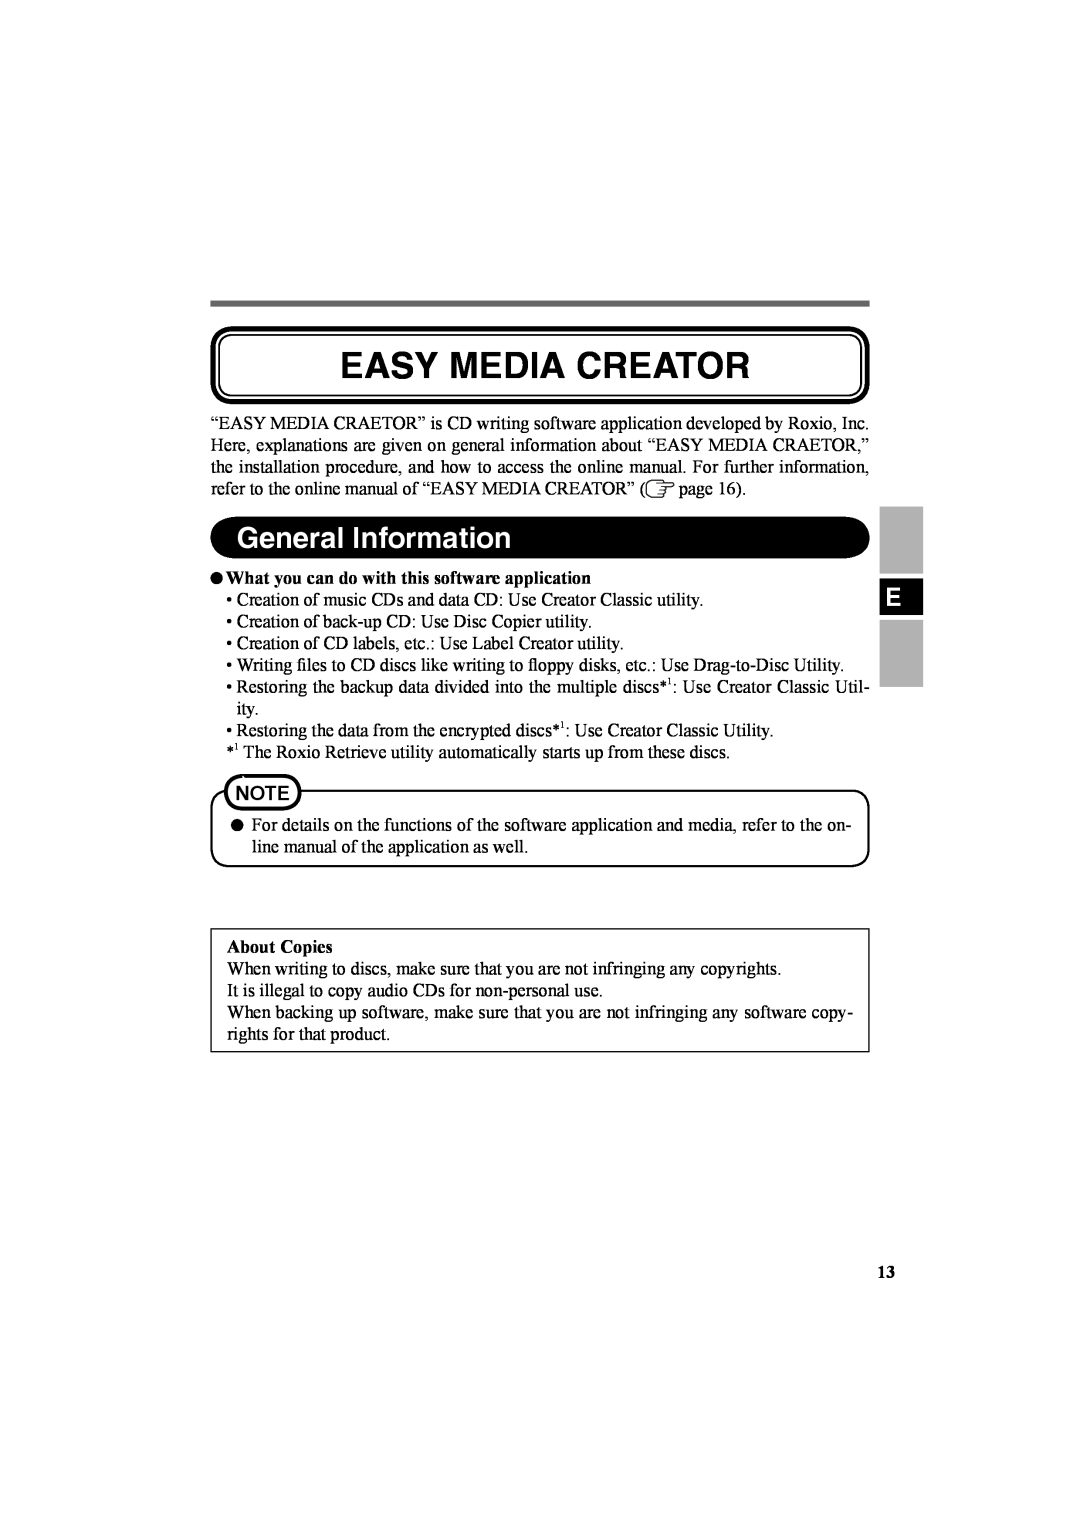 Panasonic CF-VDR301U Easy Media Creator, General Information, What you can do with this software application, About Copies 